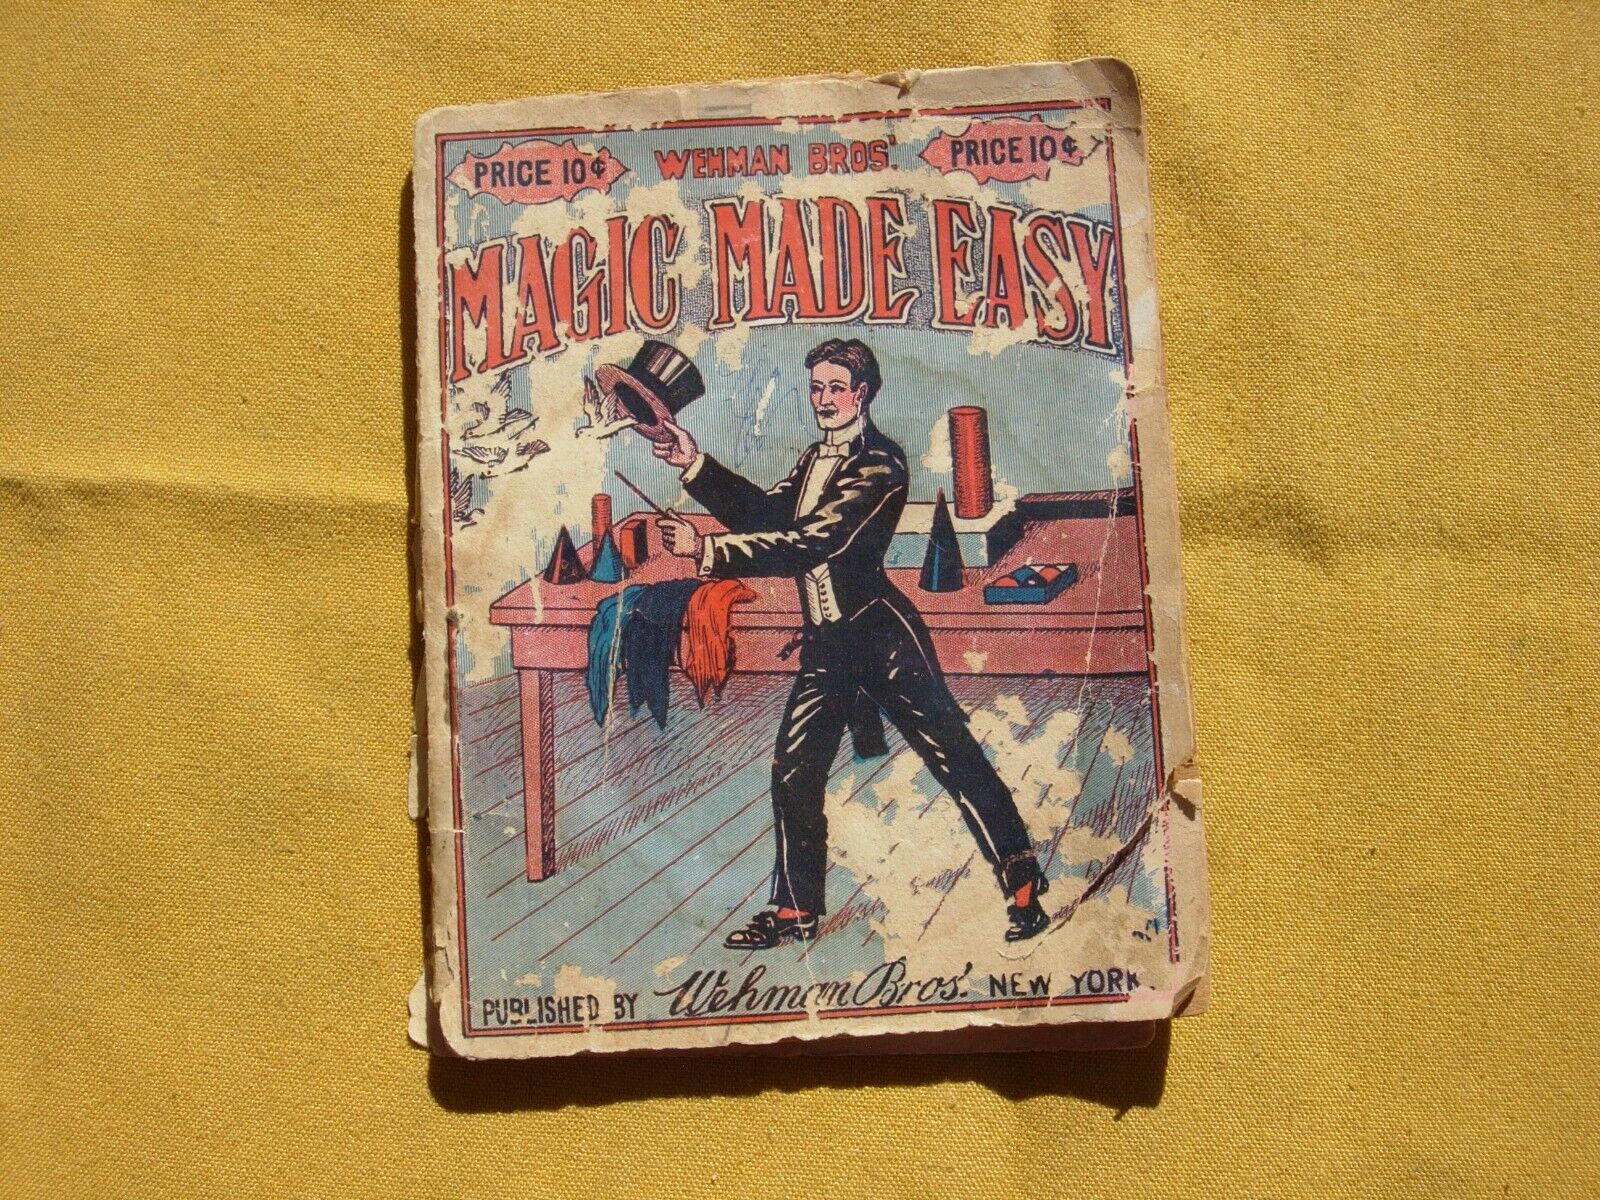 1910 MAGIC MADE EASY - PUBLISHED BY WEHMAN BROS - NEW YORK - SMALL BOOKLET 